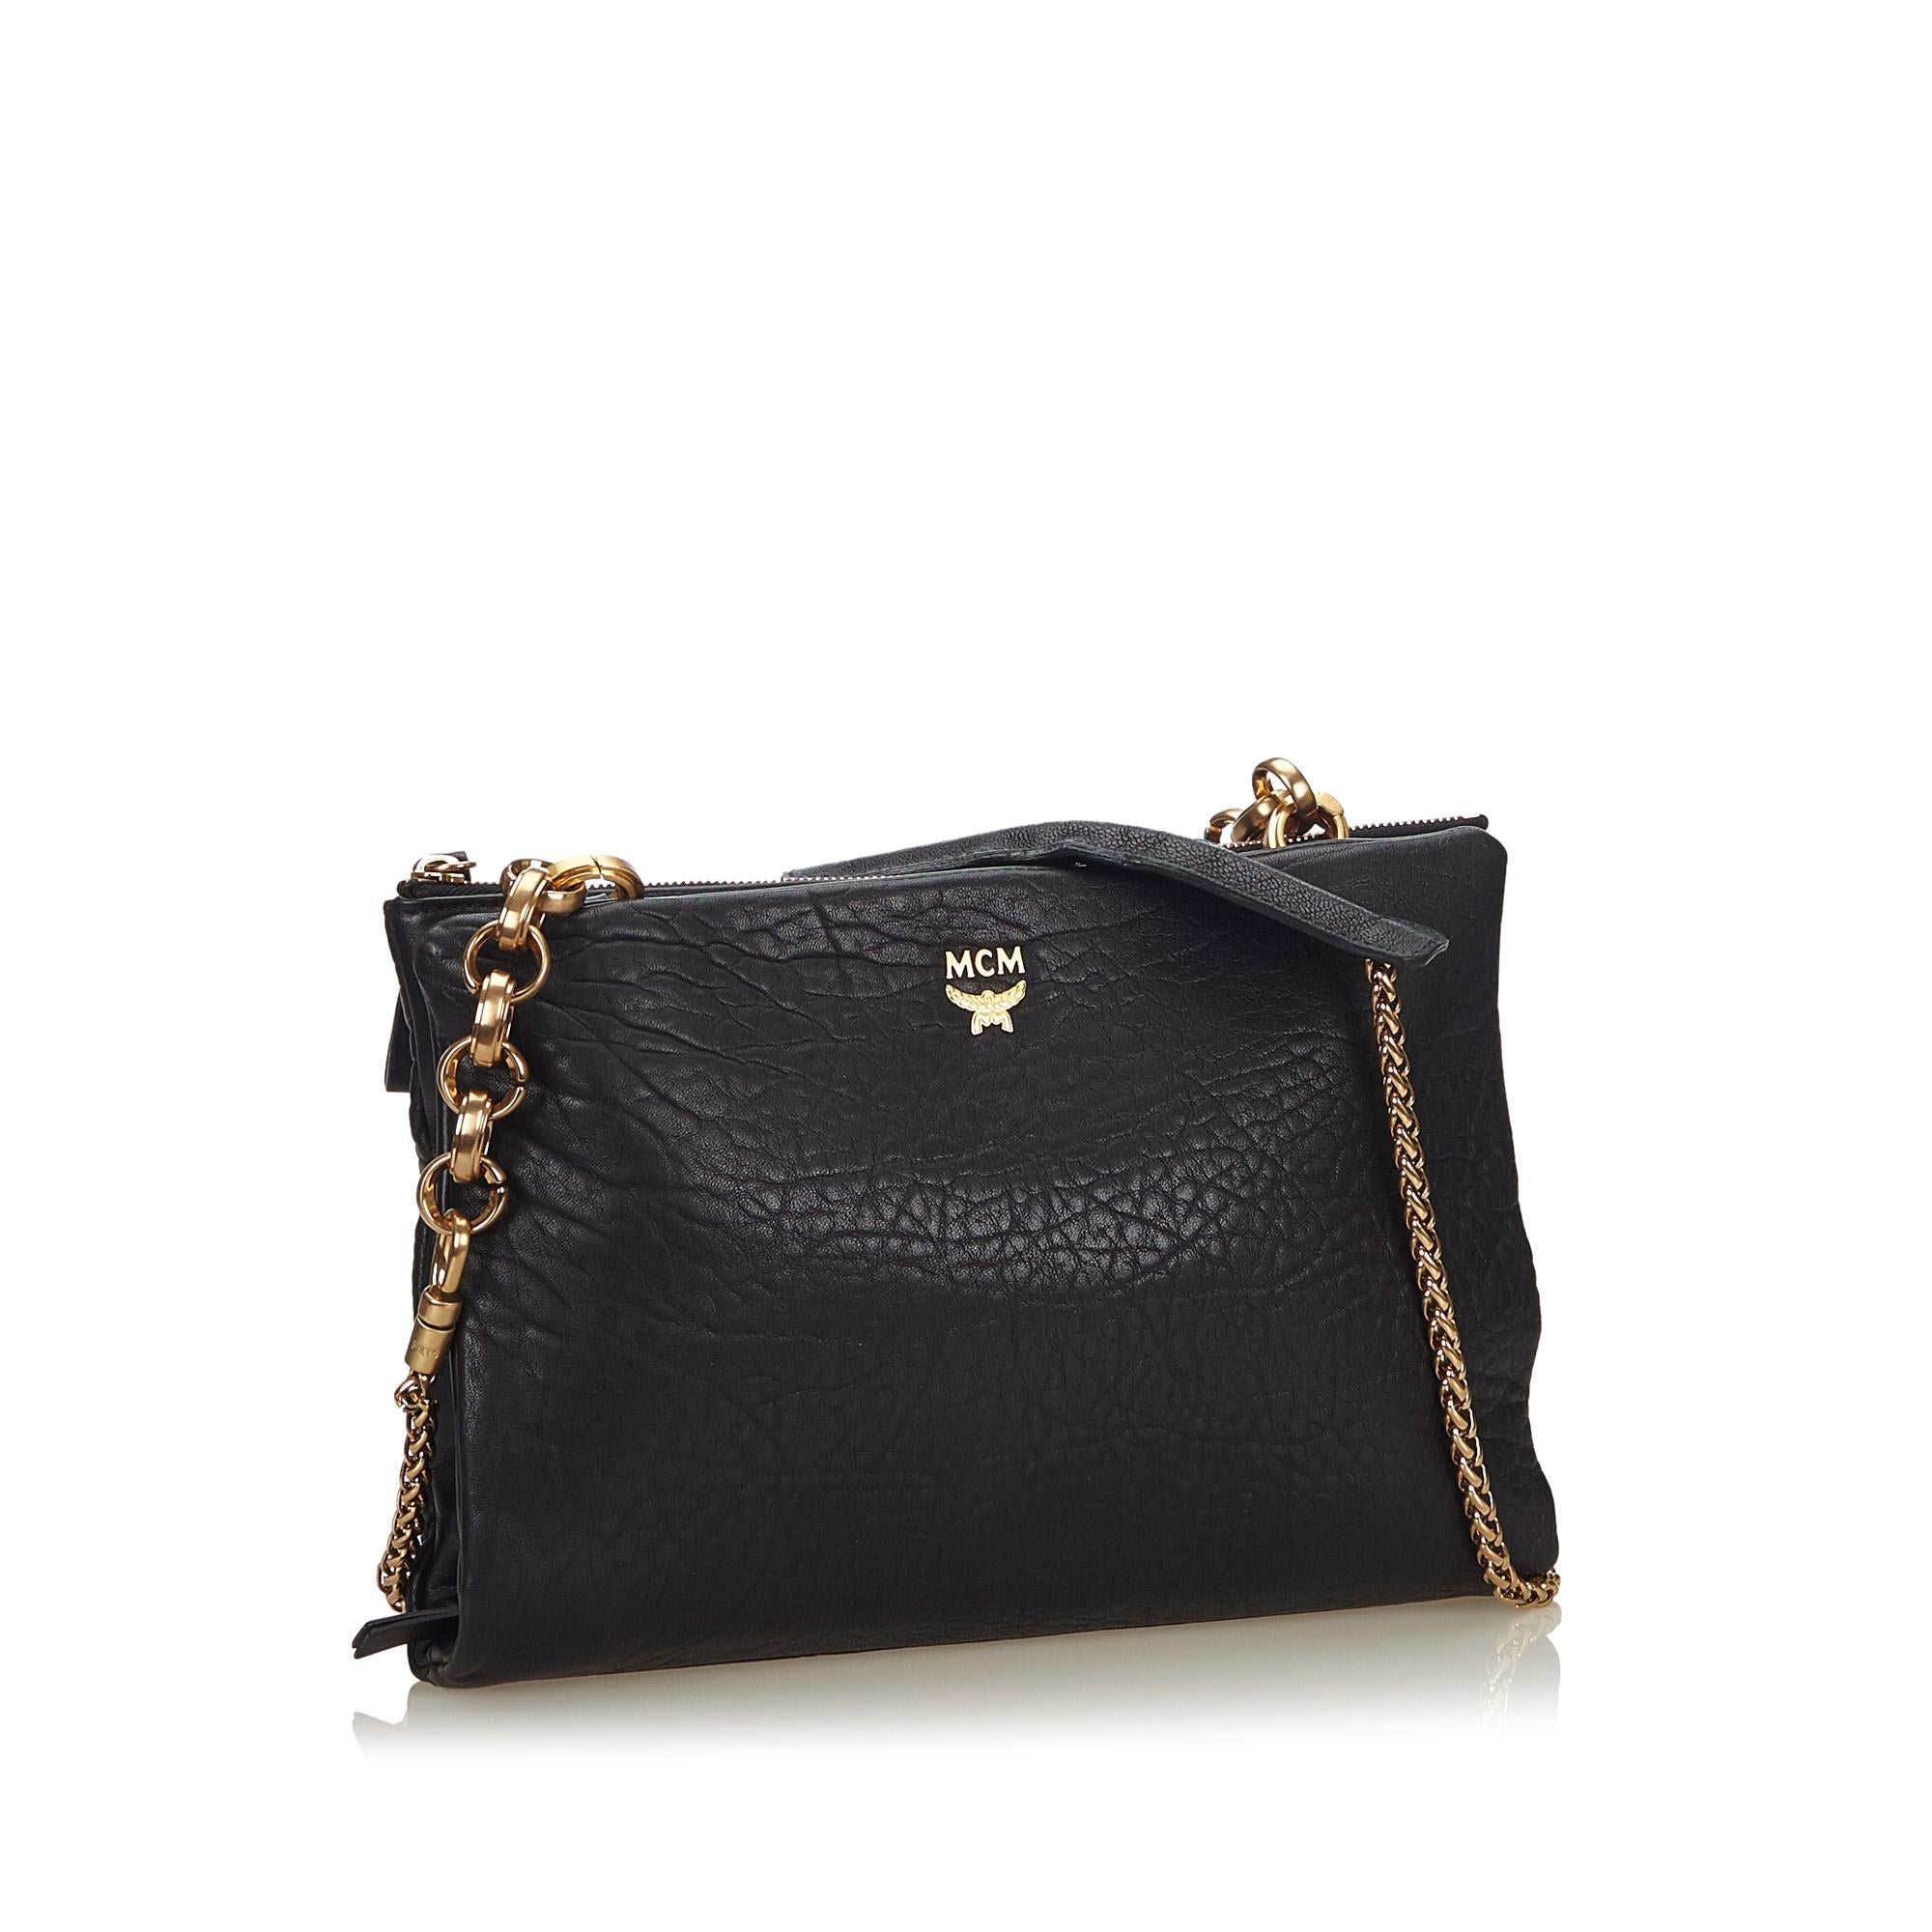 This crossbody bag features a leather body, a curb chain strap, a front flap with a magnetic closure, and a top zip closure. It carries as AB condition rating.

Inclusions: 
This item does not come with inclusions.

Dimensions:
Length: 22.00